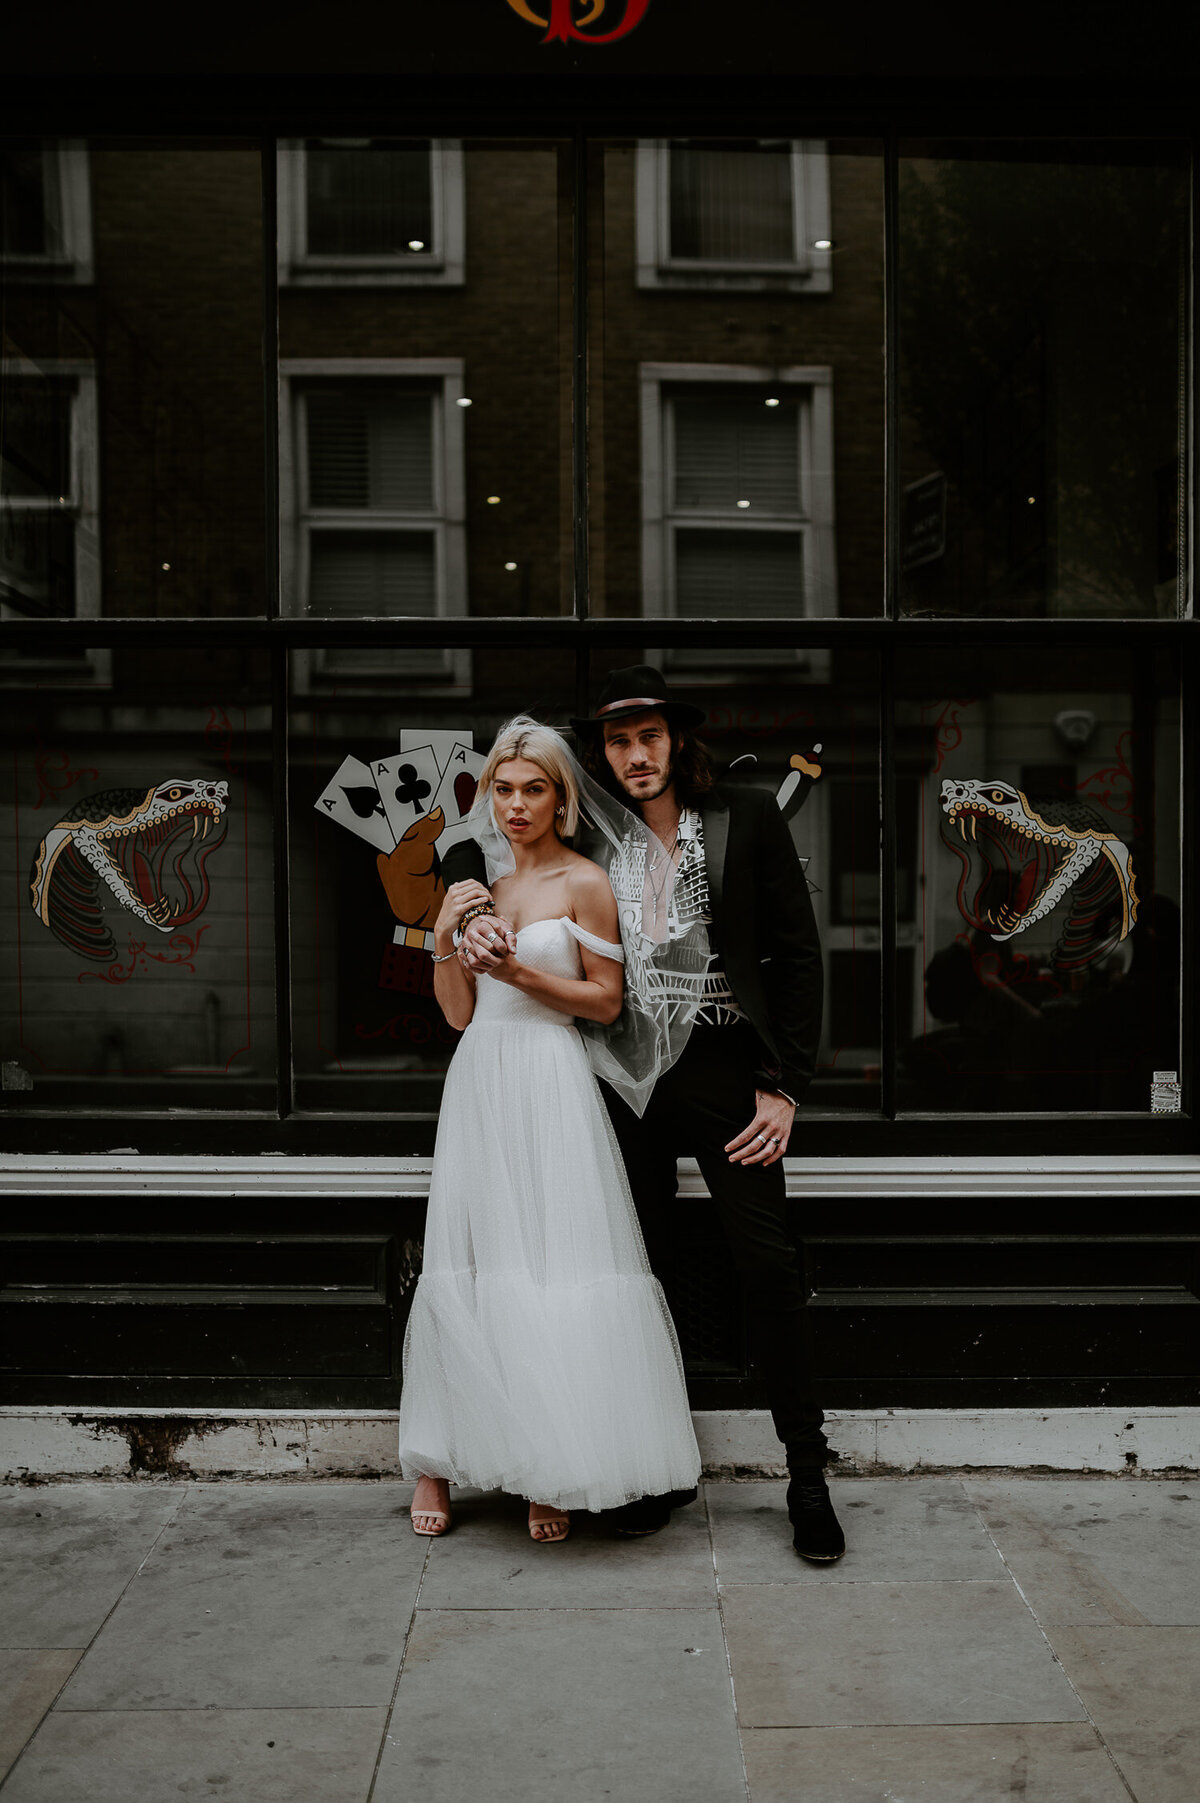 An alternative wedding couple stand outside a tattoo shop in Shoreditch London. The bride is wearing a shoulder cut wedding dress and the groom is has long hair and is wearing a casual outfit with a hat.